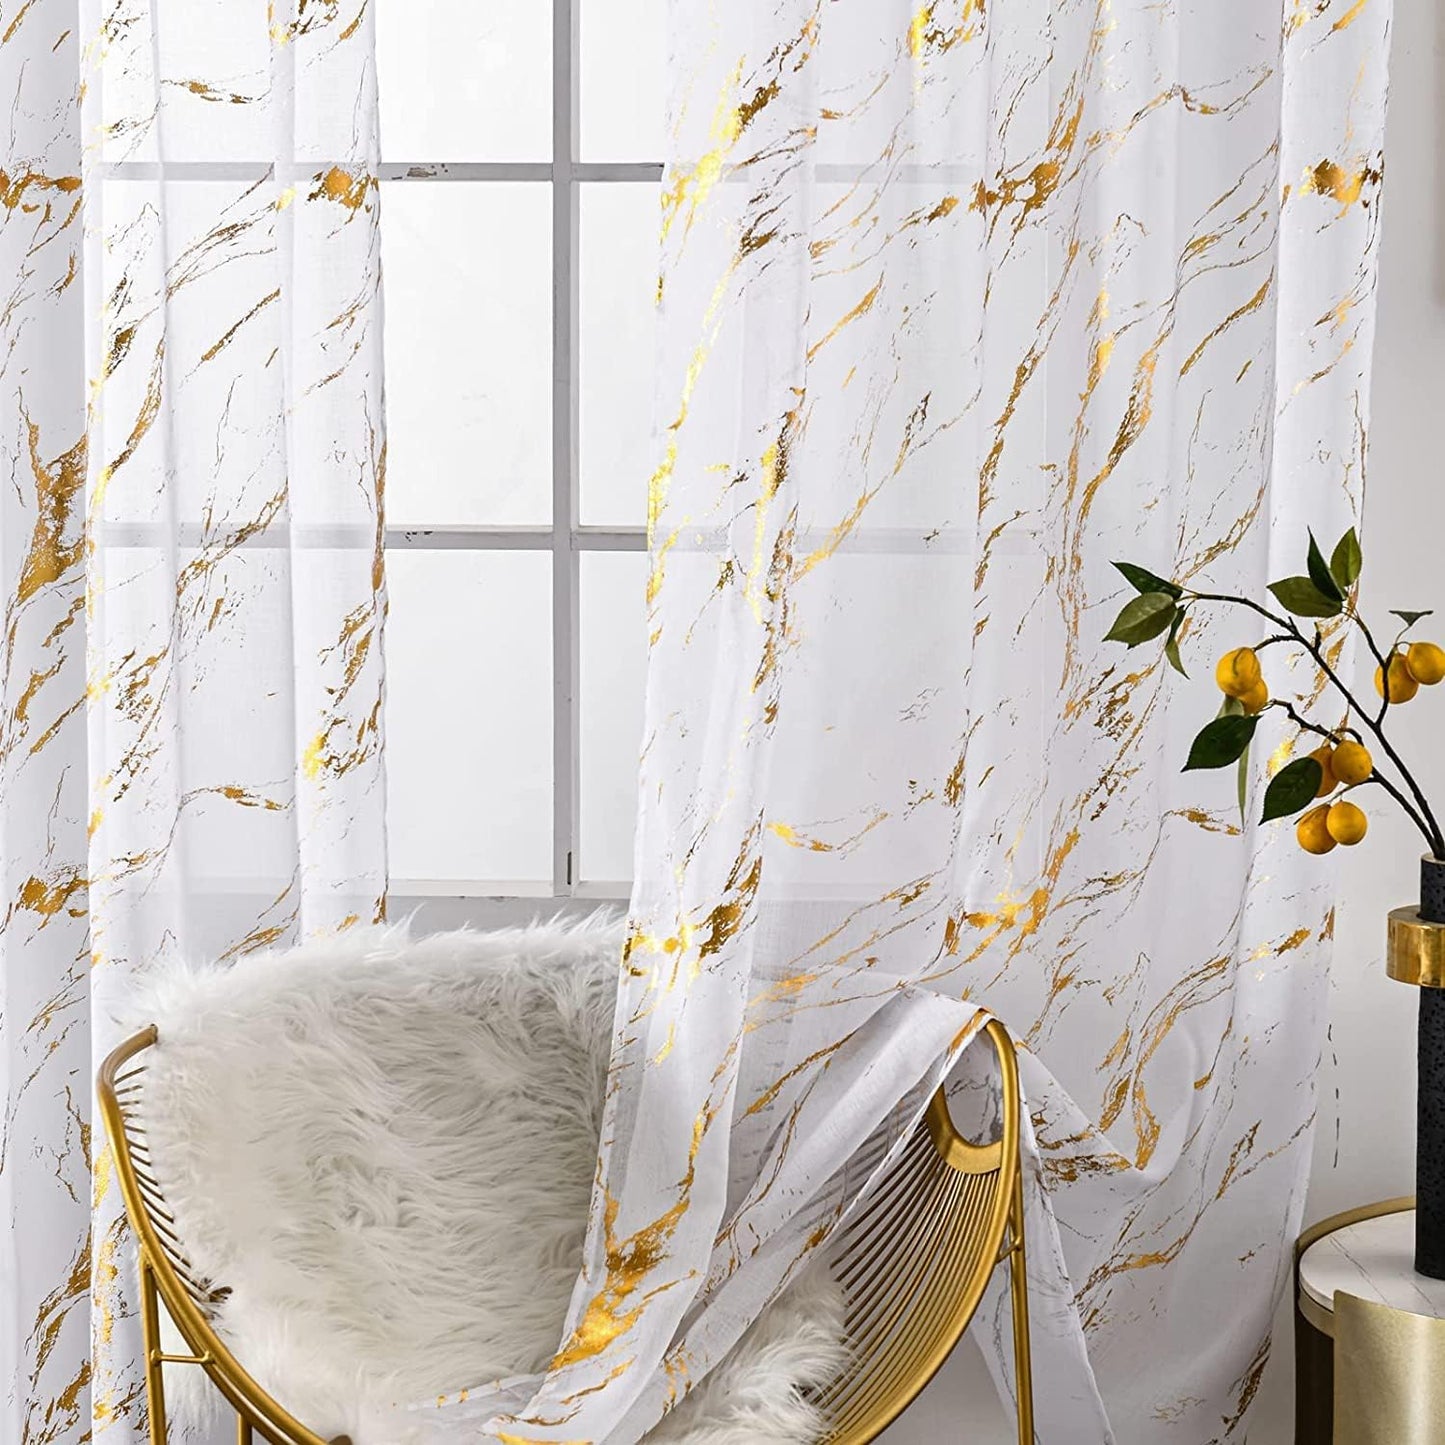 Sutuo Home Marble White Sheer Curtains 84 Inch Length, Gold Foil Print Metallic Bronzing, Privacy Window Treatment Decor Abstract Drape Pair 2 Panels Set for Bedroom Kitchen Living Room 52" W X 84" L  Sutuo Home Gold And White 52" W X 108" L, 2 Panels 